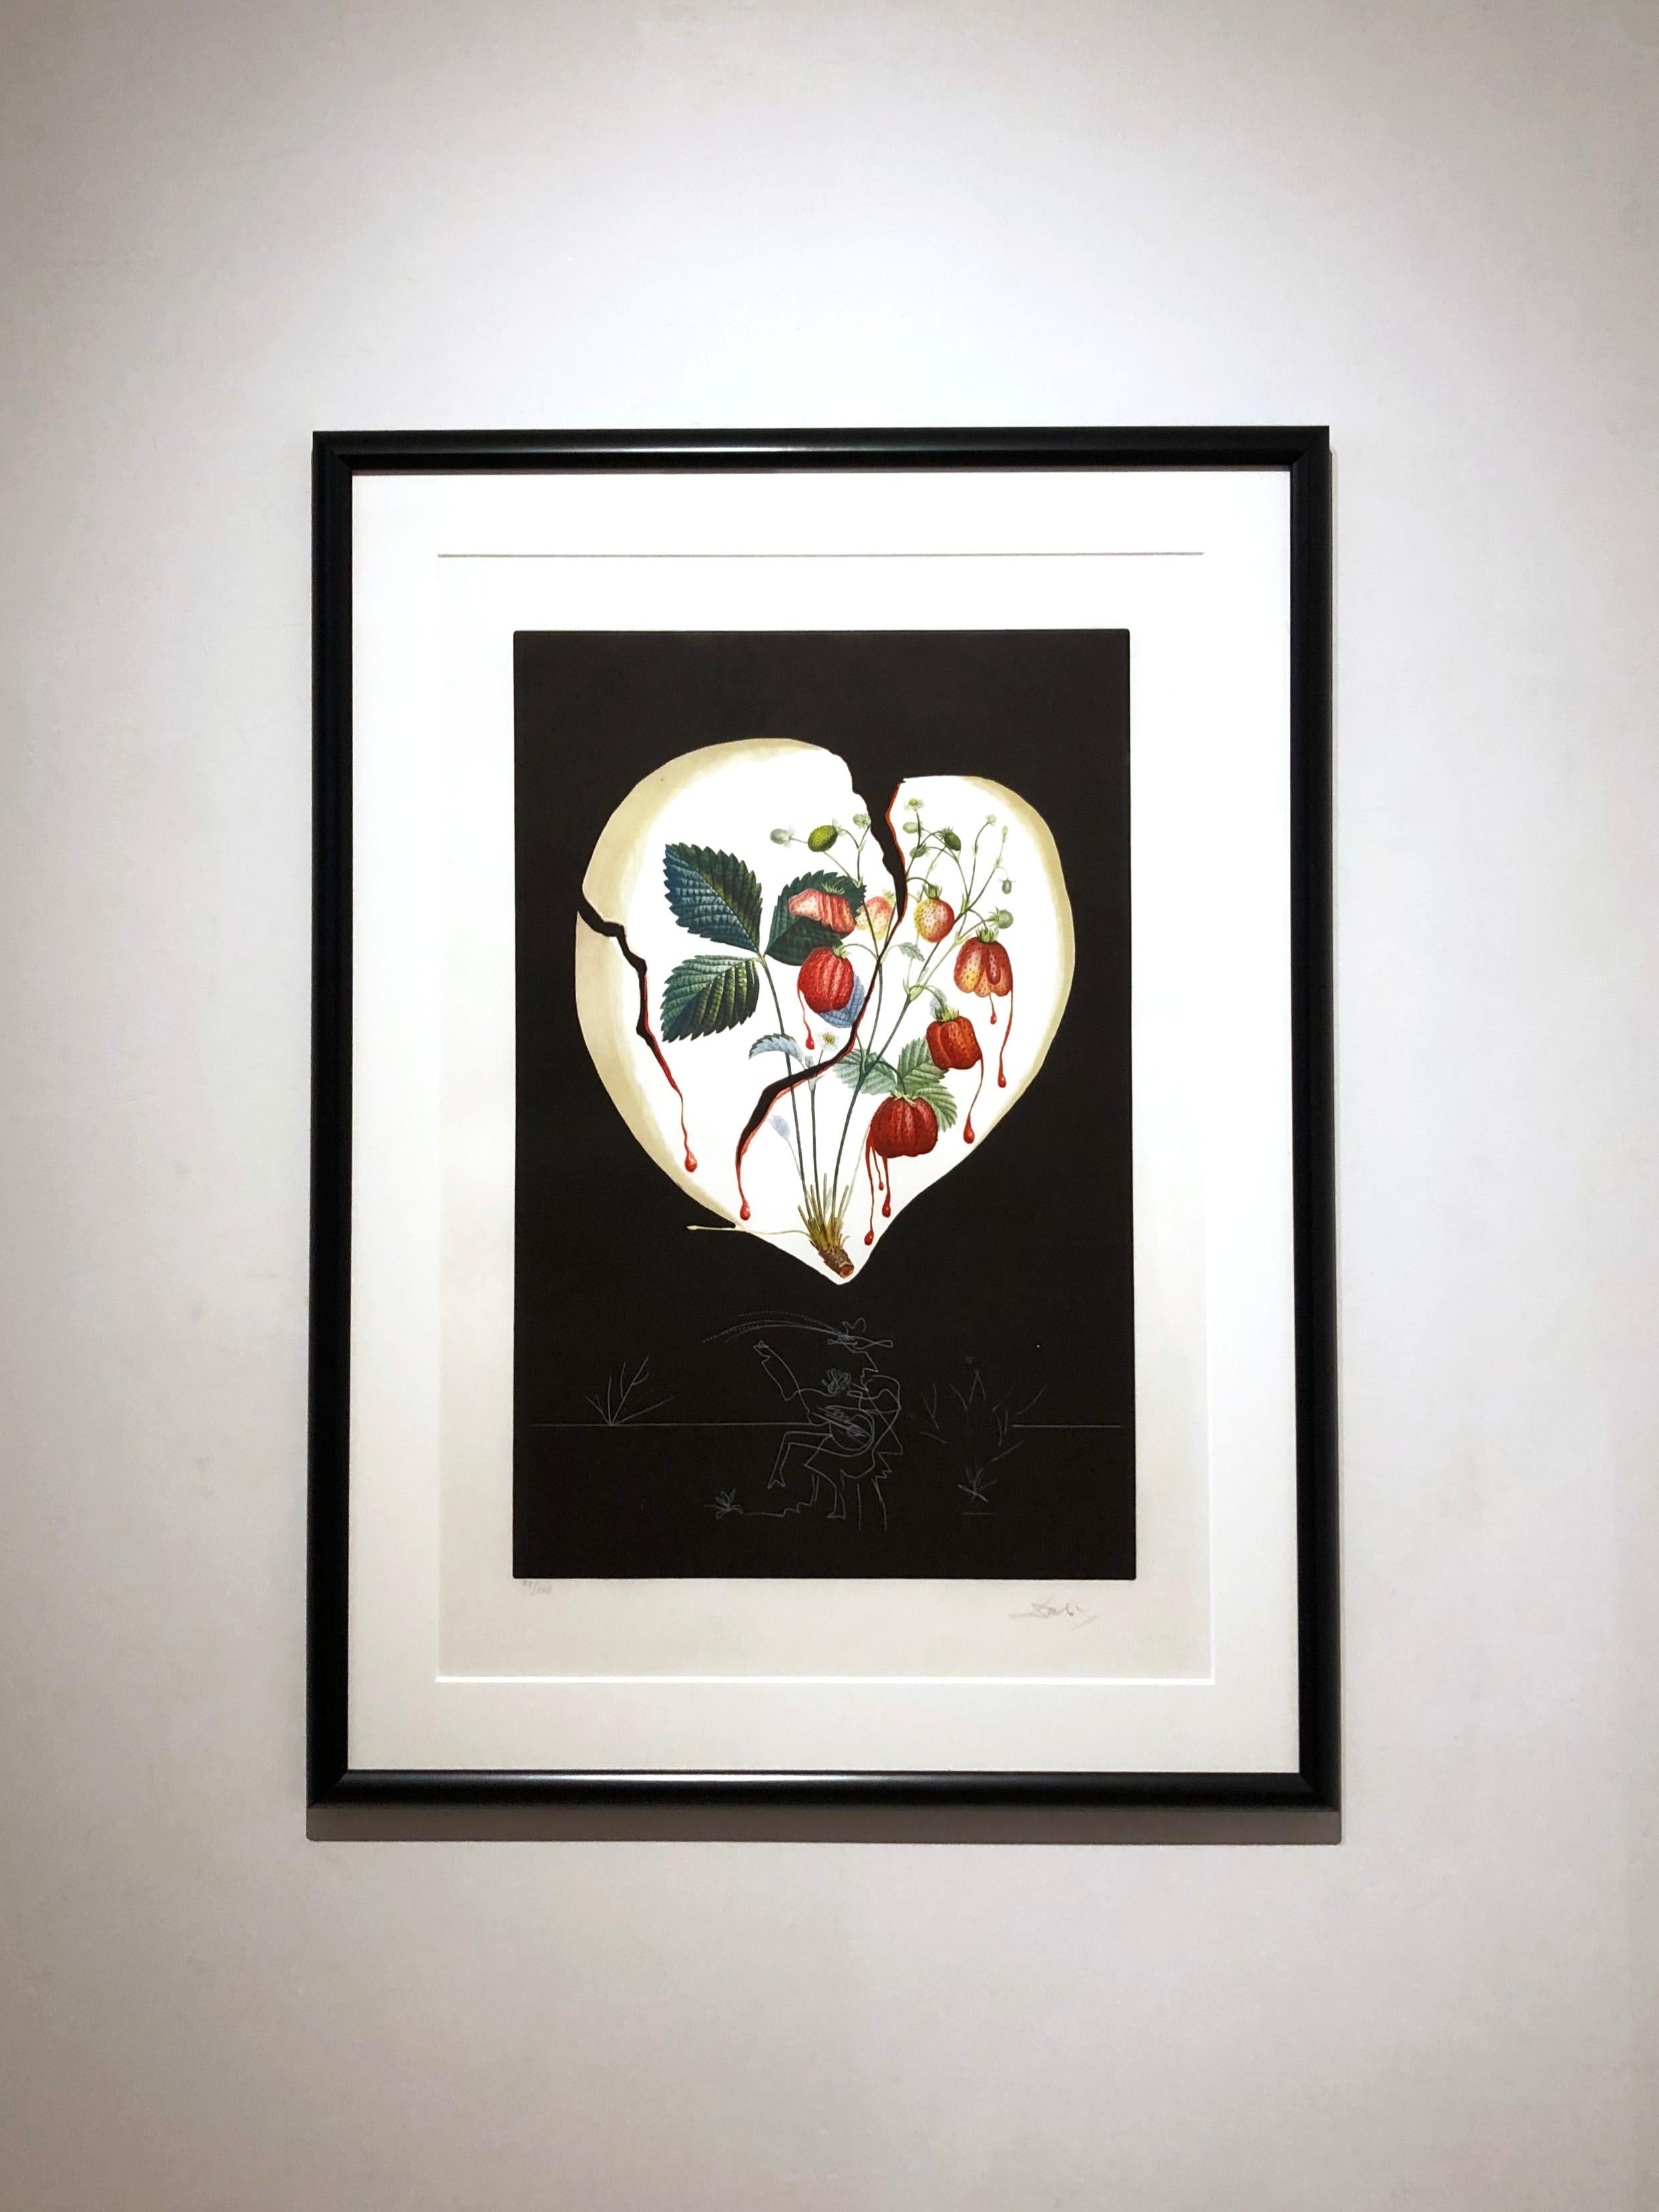 Artist:  Dali, Salvador
Title:  Strawberries (Coeur de Fraises)
Series:  Fruits
Date:  1970
Medium:  Lithograph with original drypoint, printed in color
Unframed Dimensions:  24.25